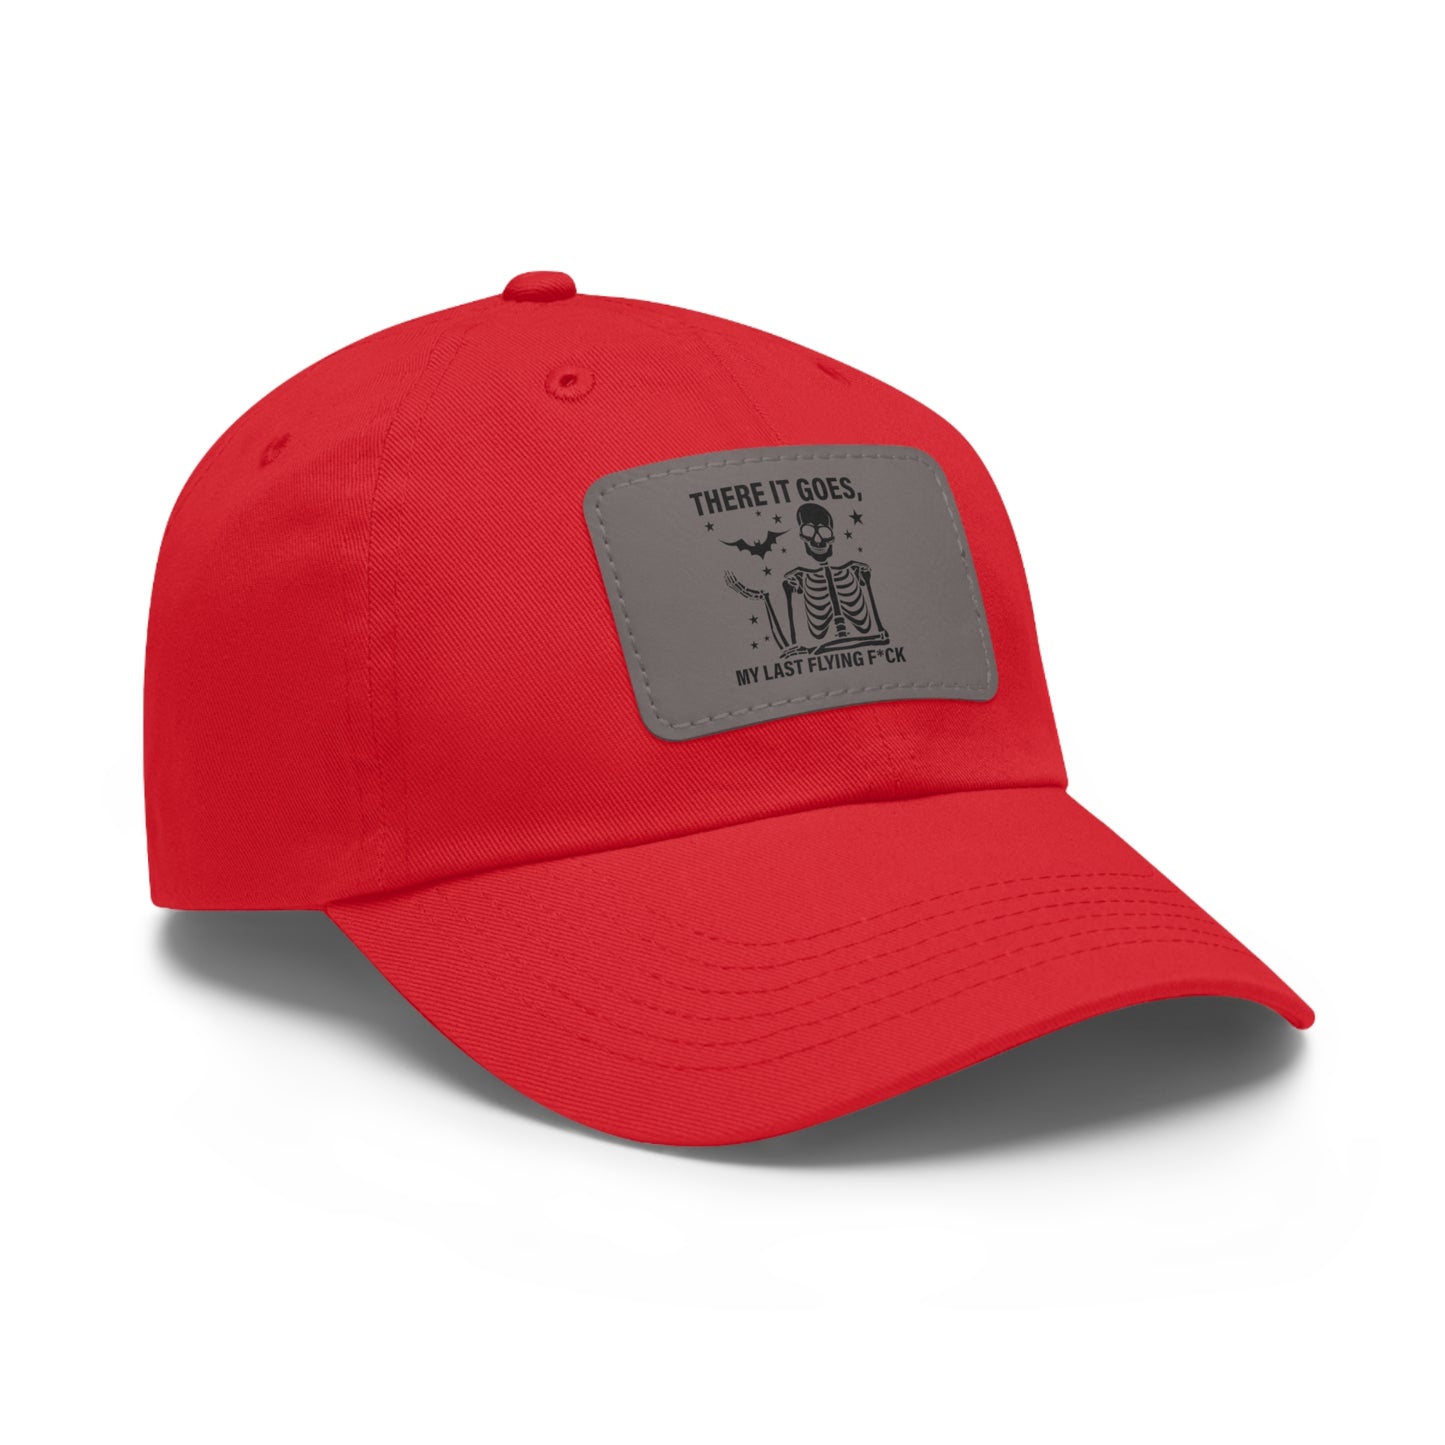 There It Goes My Last Flying Fuck | Dad Hat with Rectangular Leather Patch | Unisex Hat